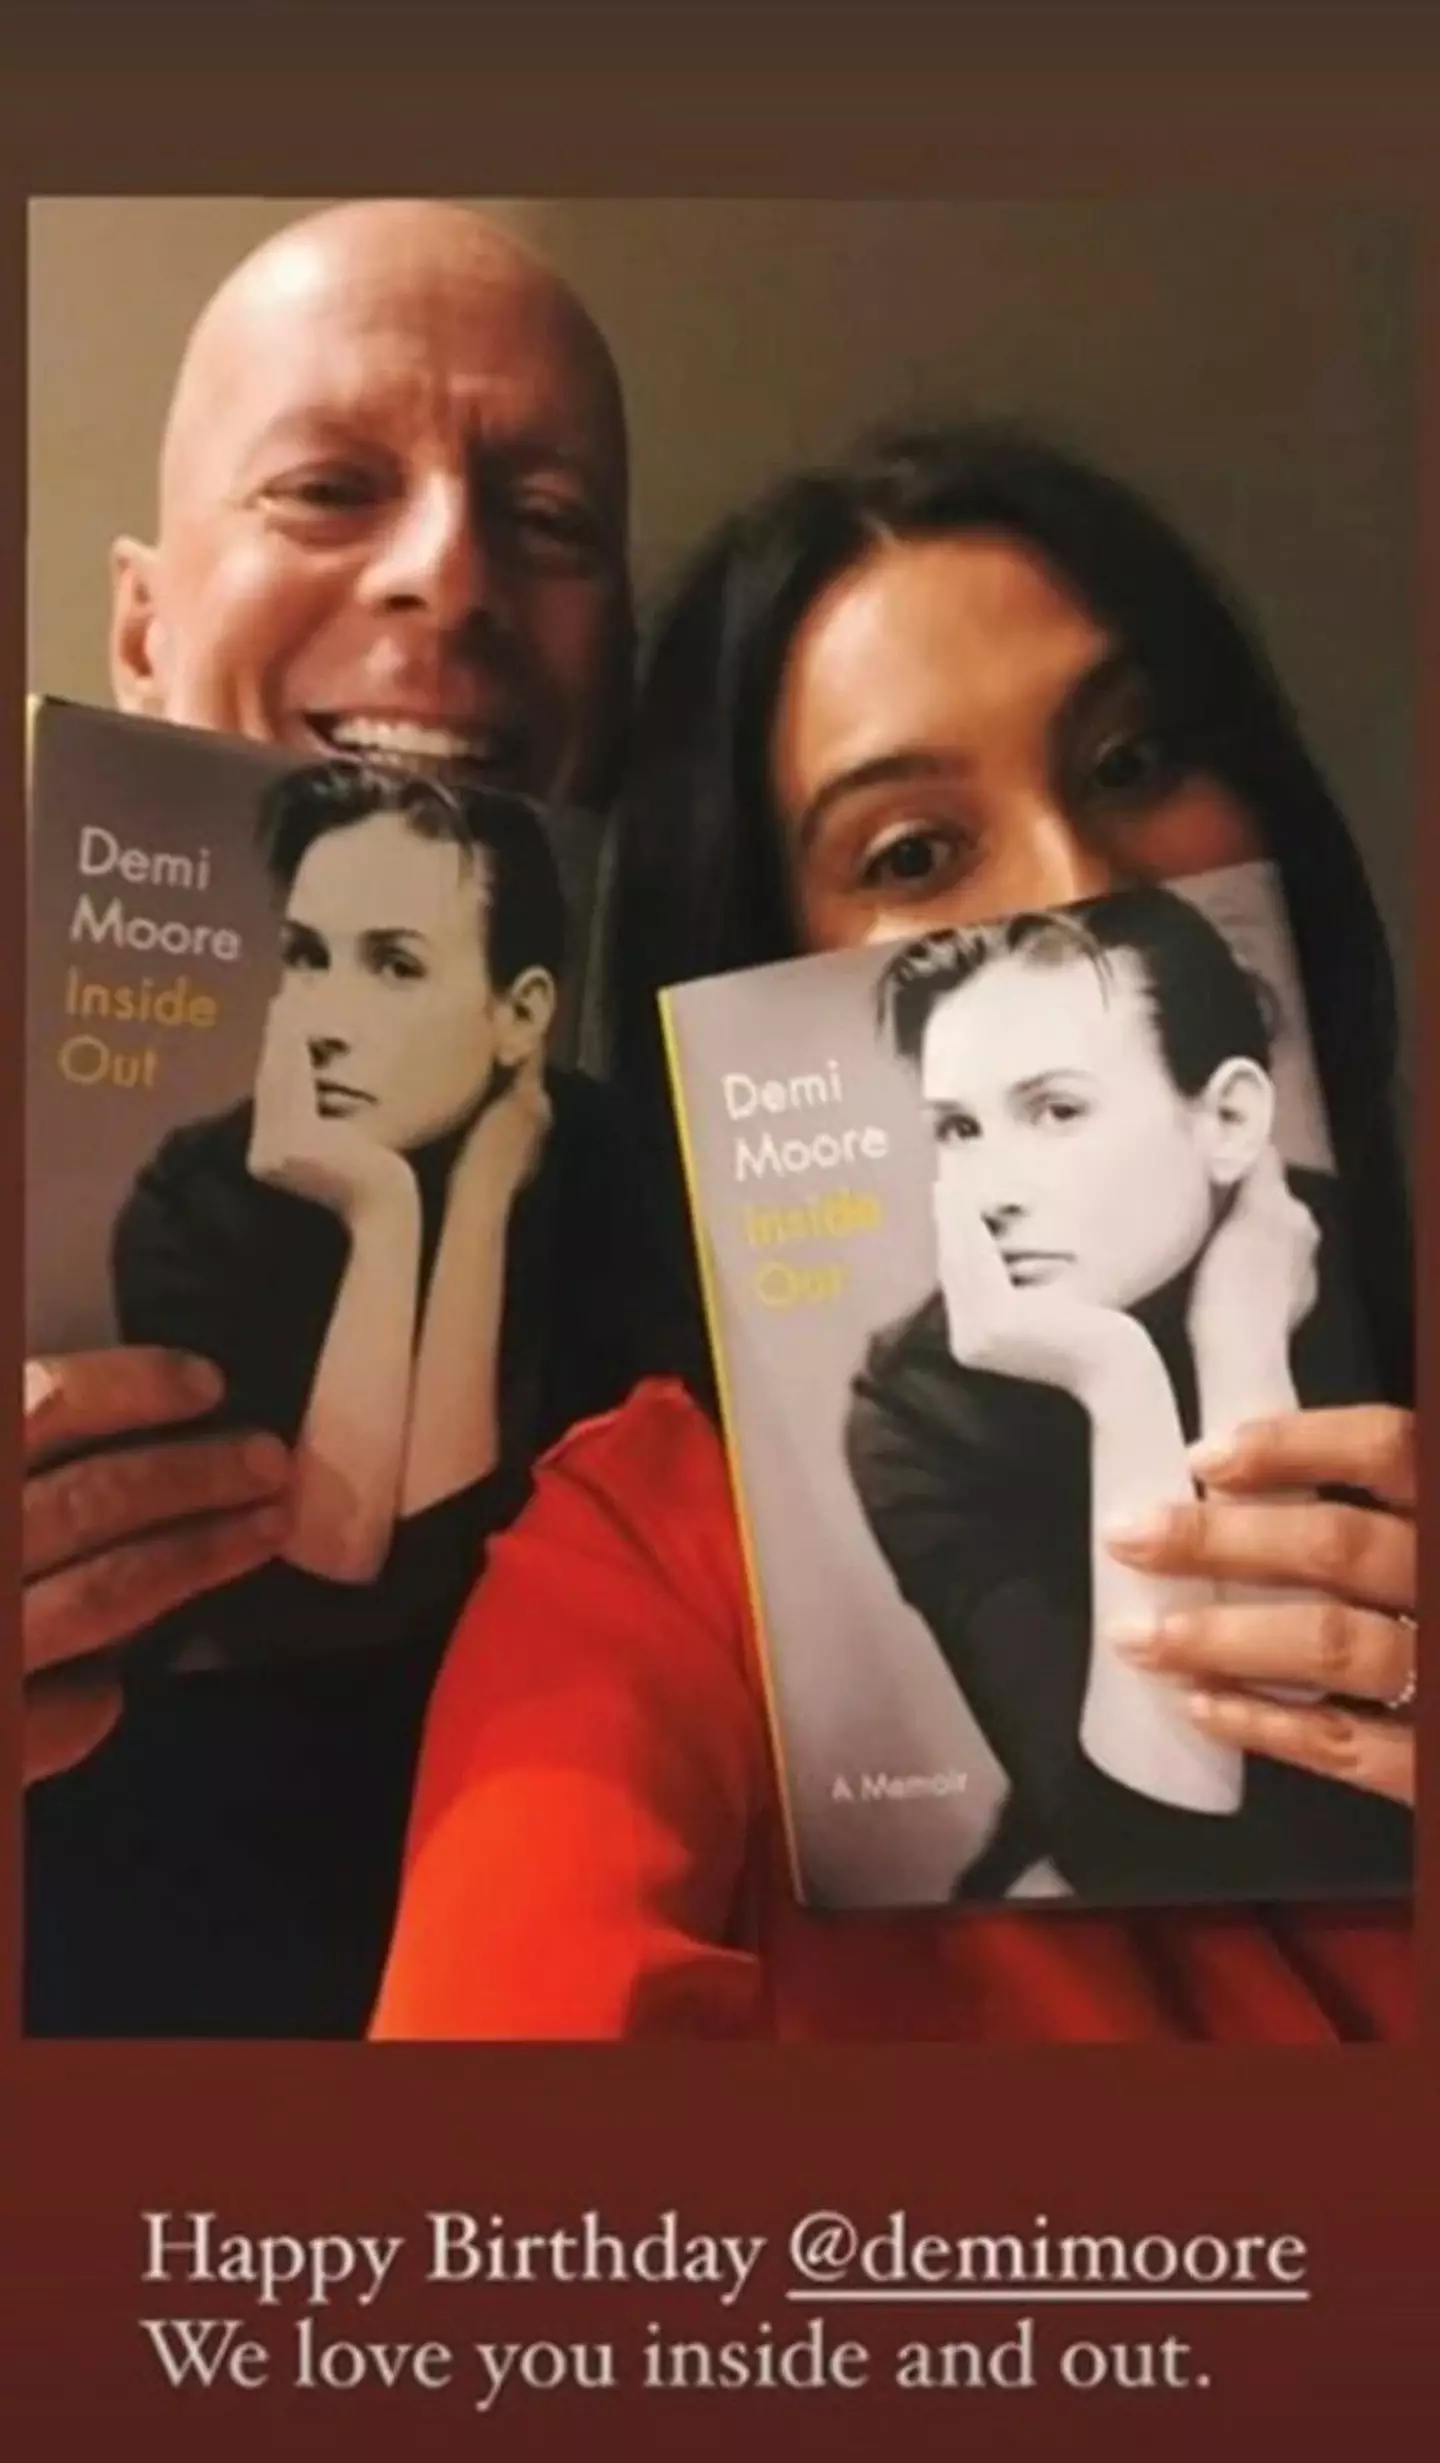 Bruce and Emma posed with Demi's memoir to wish her happy birthday.